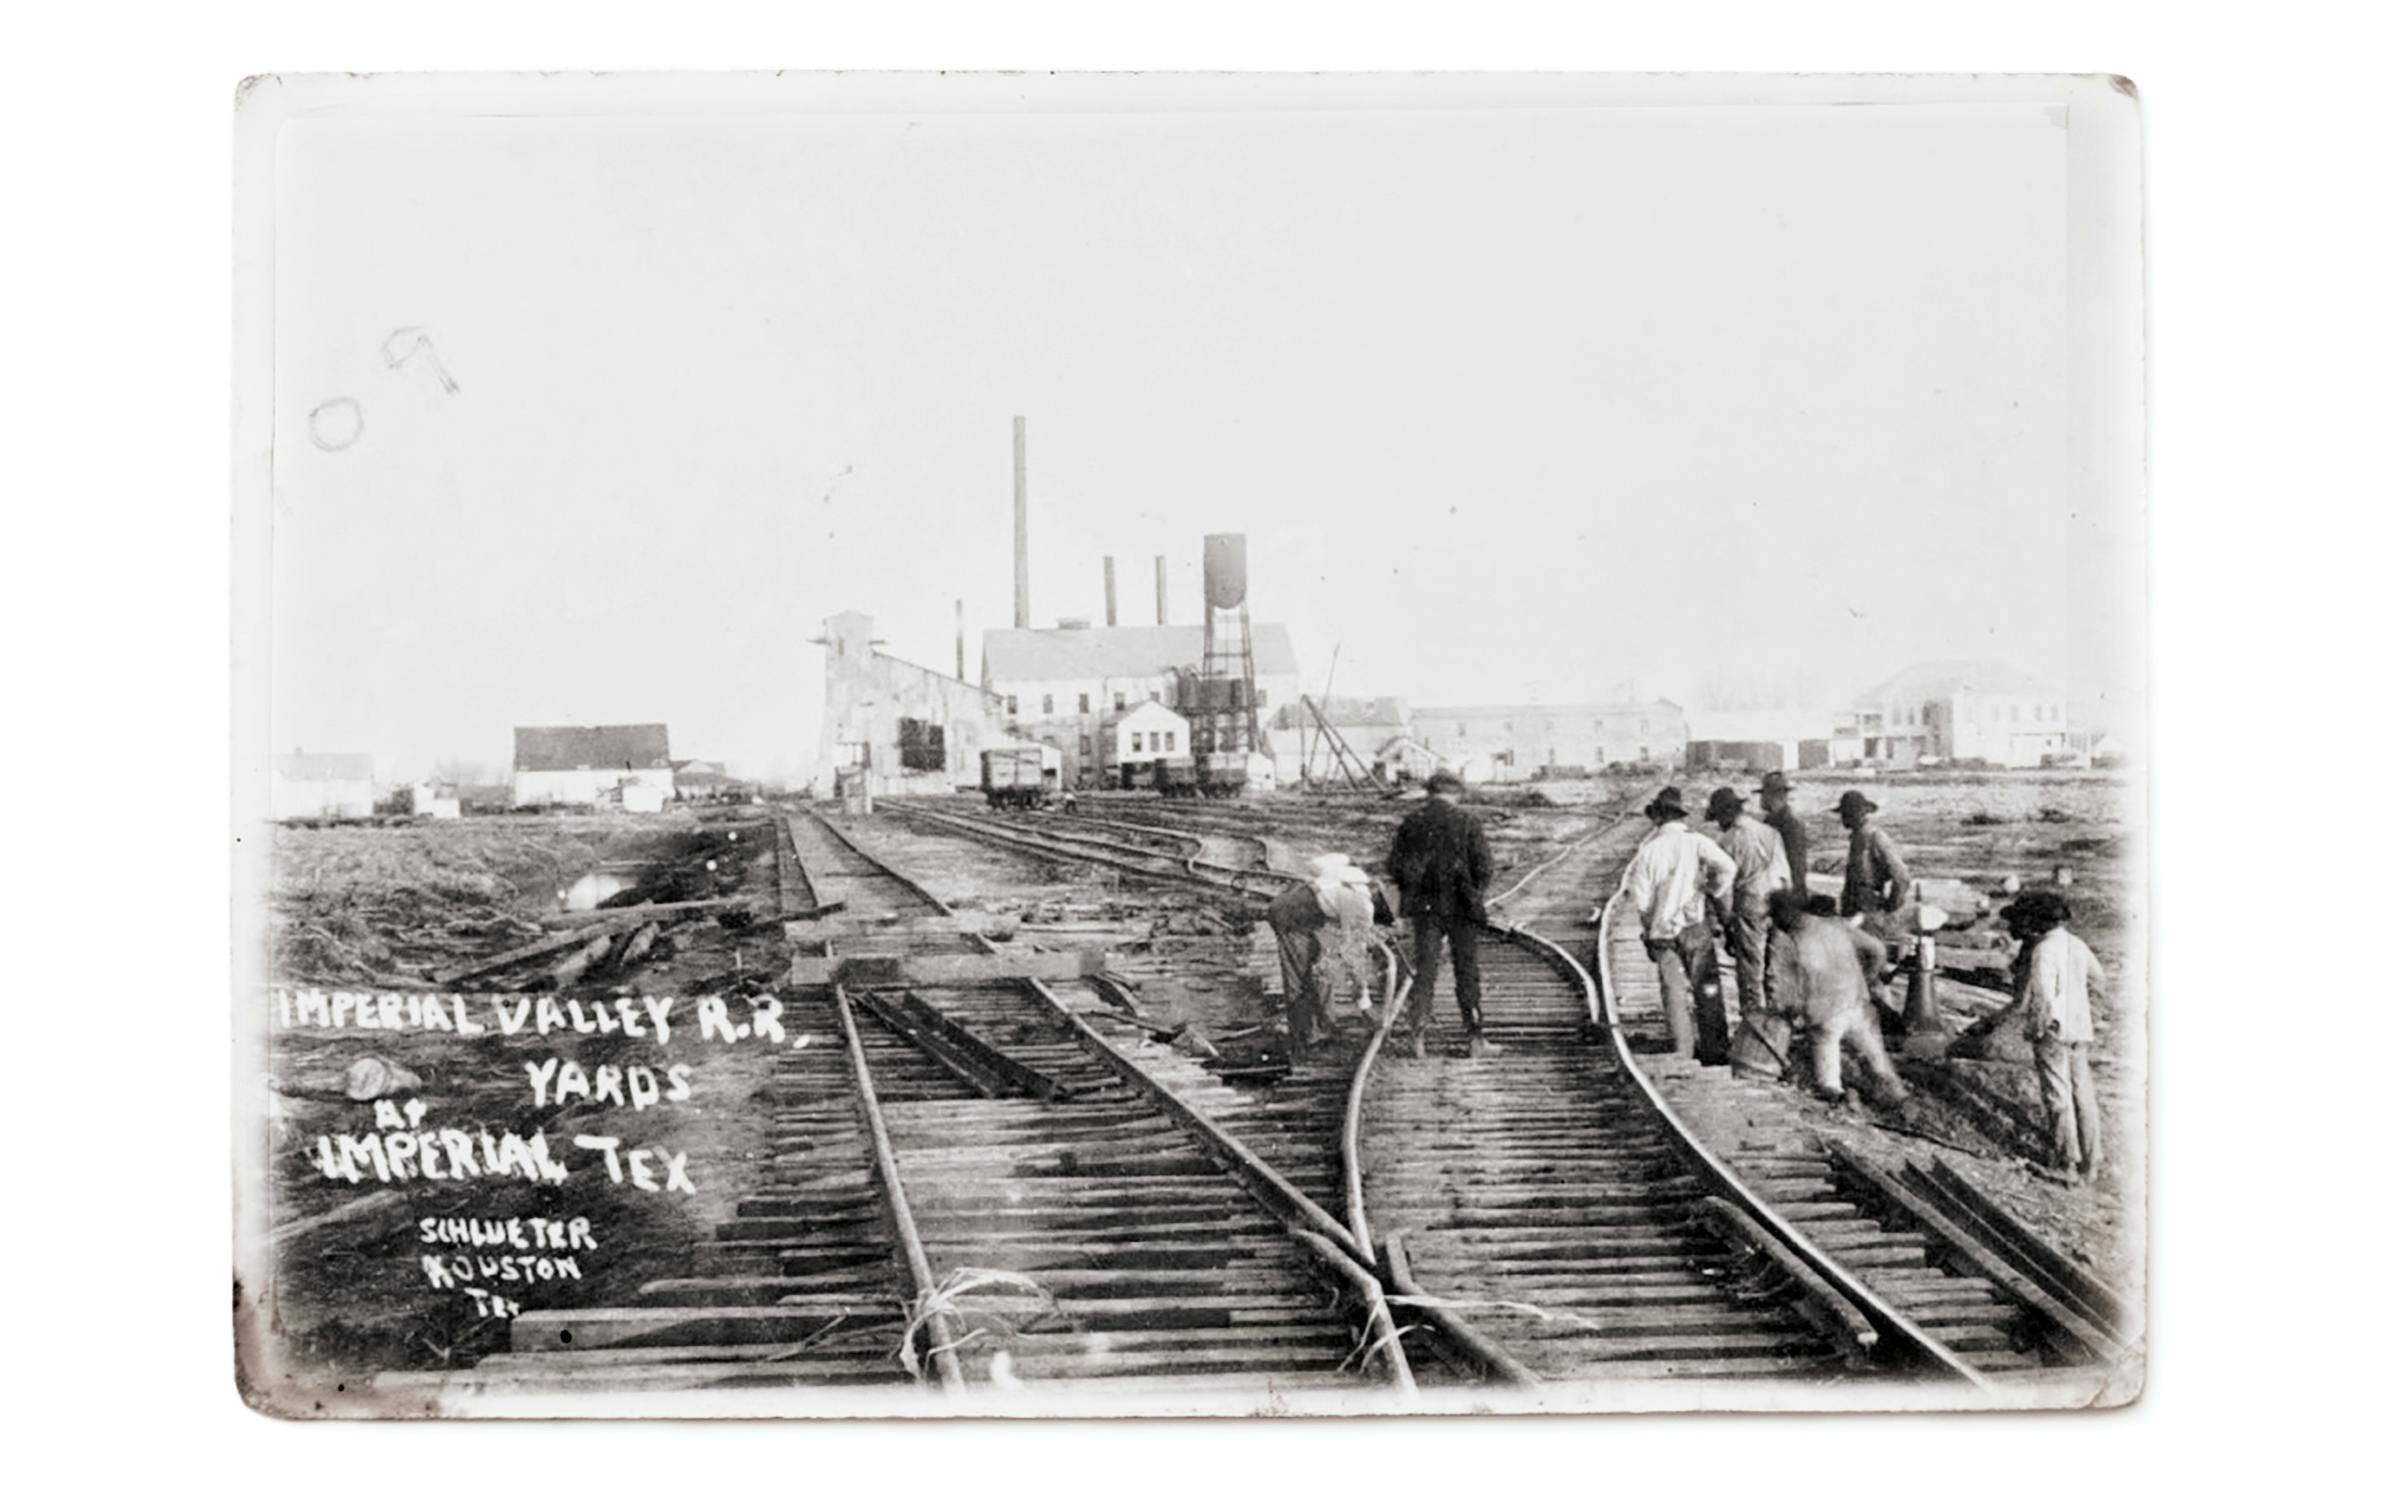 A crew repairing Sugar Land Railroad lines in 1909. (The mill can be seen in the distance.)